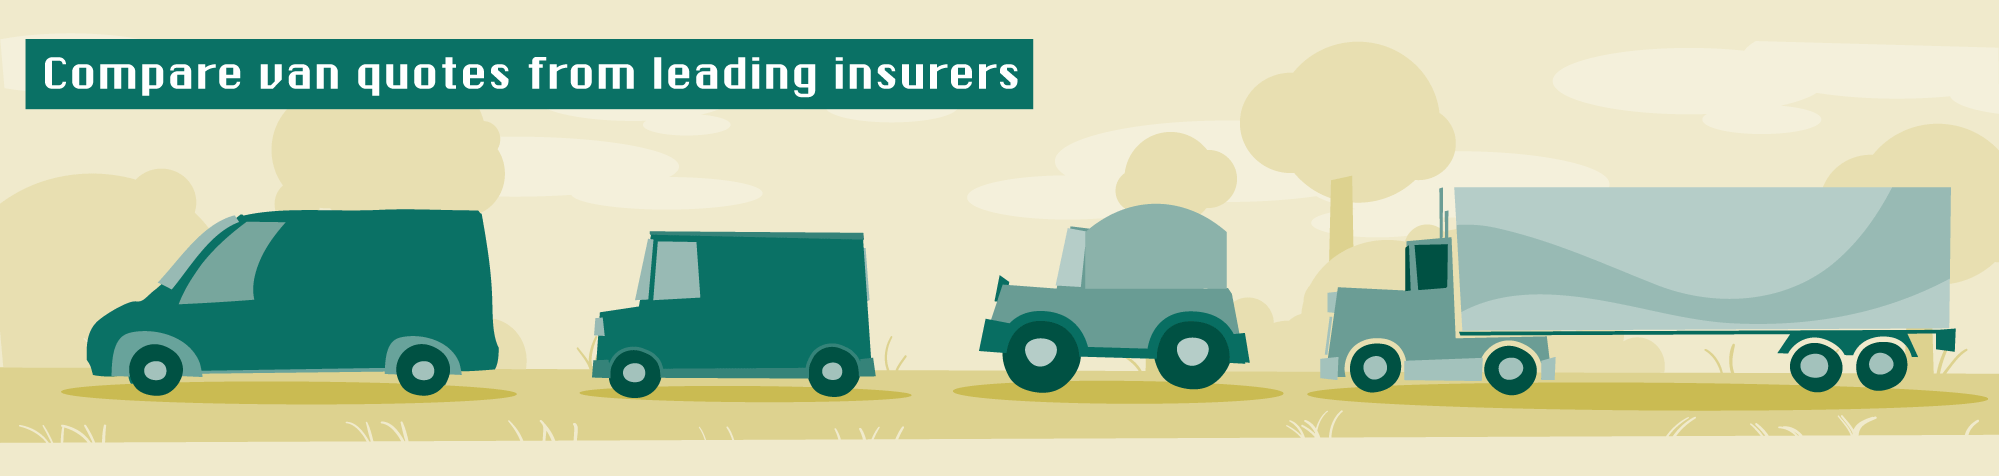 Compare van quotes from leading insurers